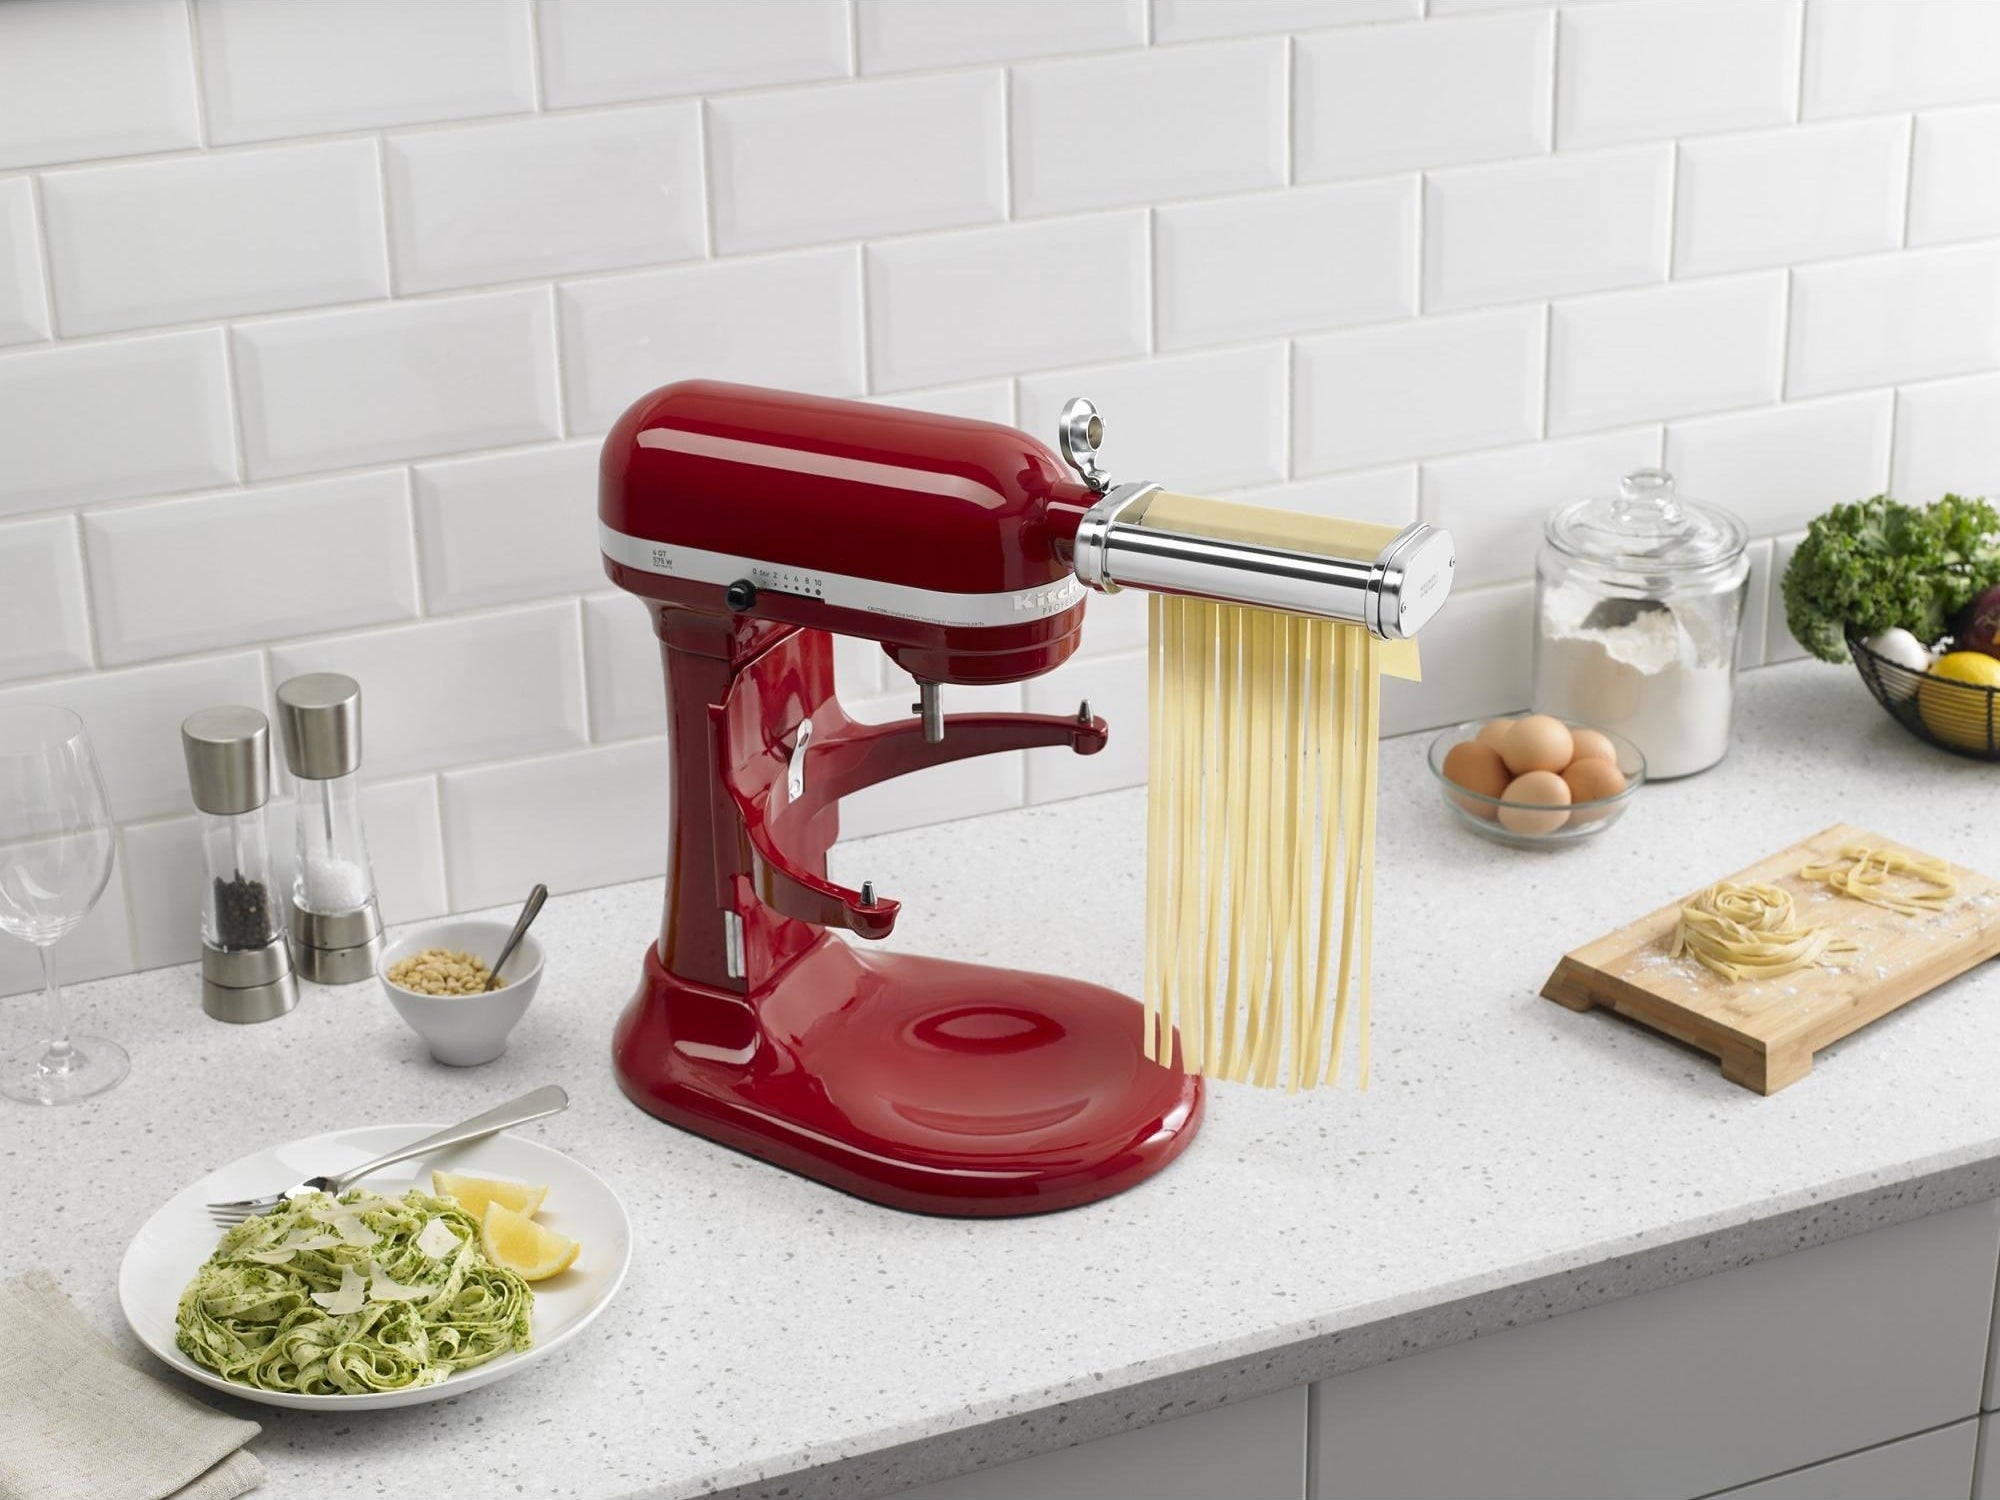 the attachment connected to the mixer making pasta